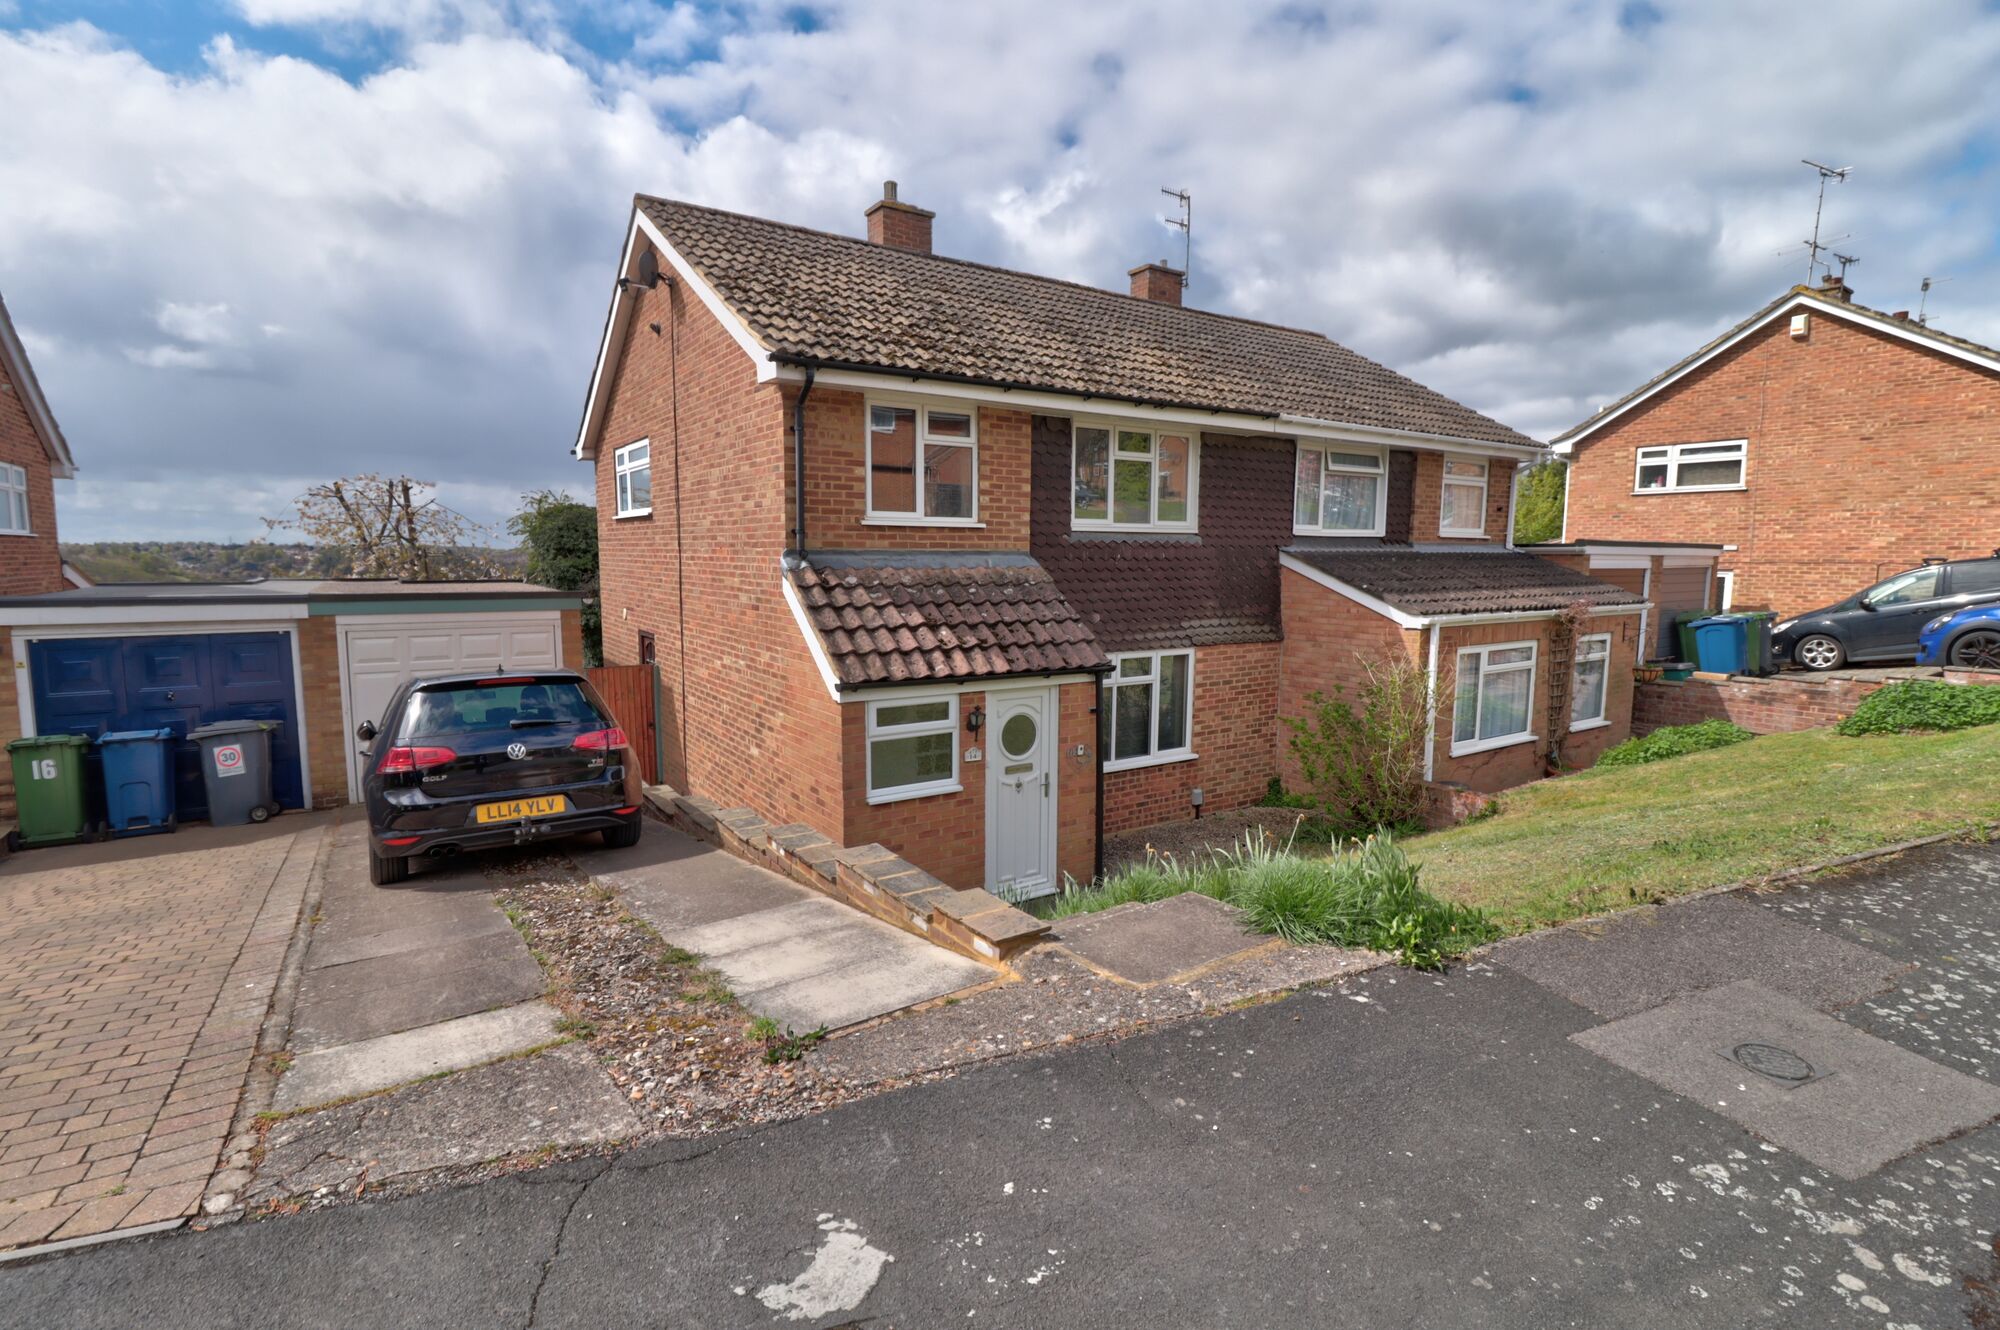 3 bedroom semi detached house to rent, Available from 09/08/2024 South View, Downley, HP13, main image